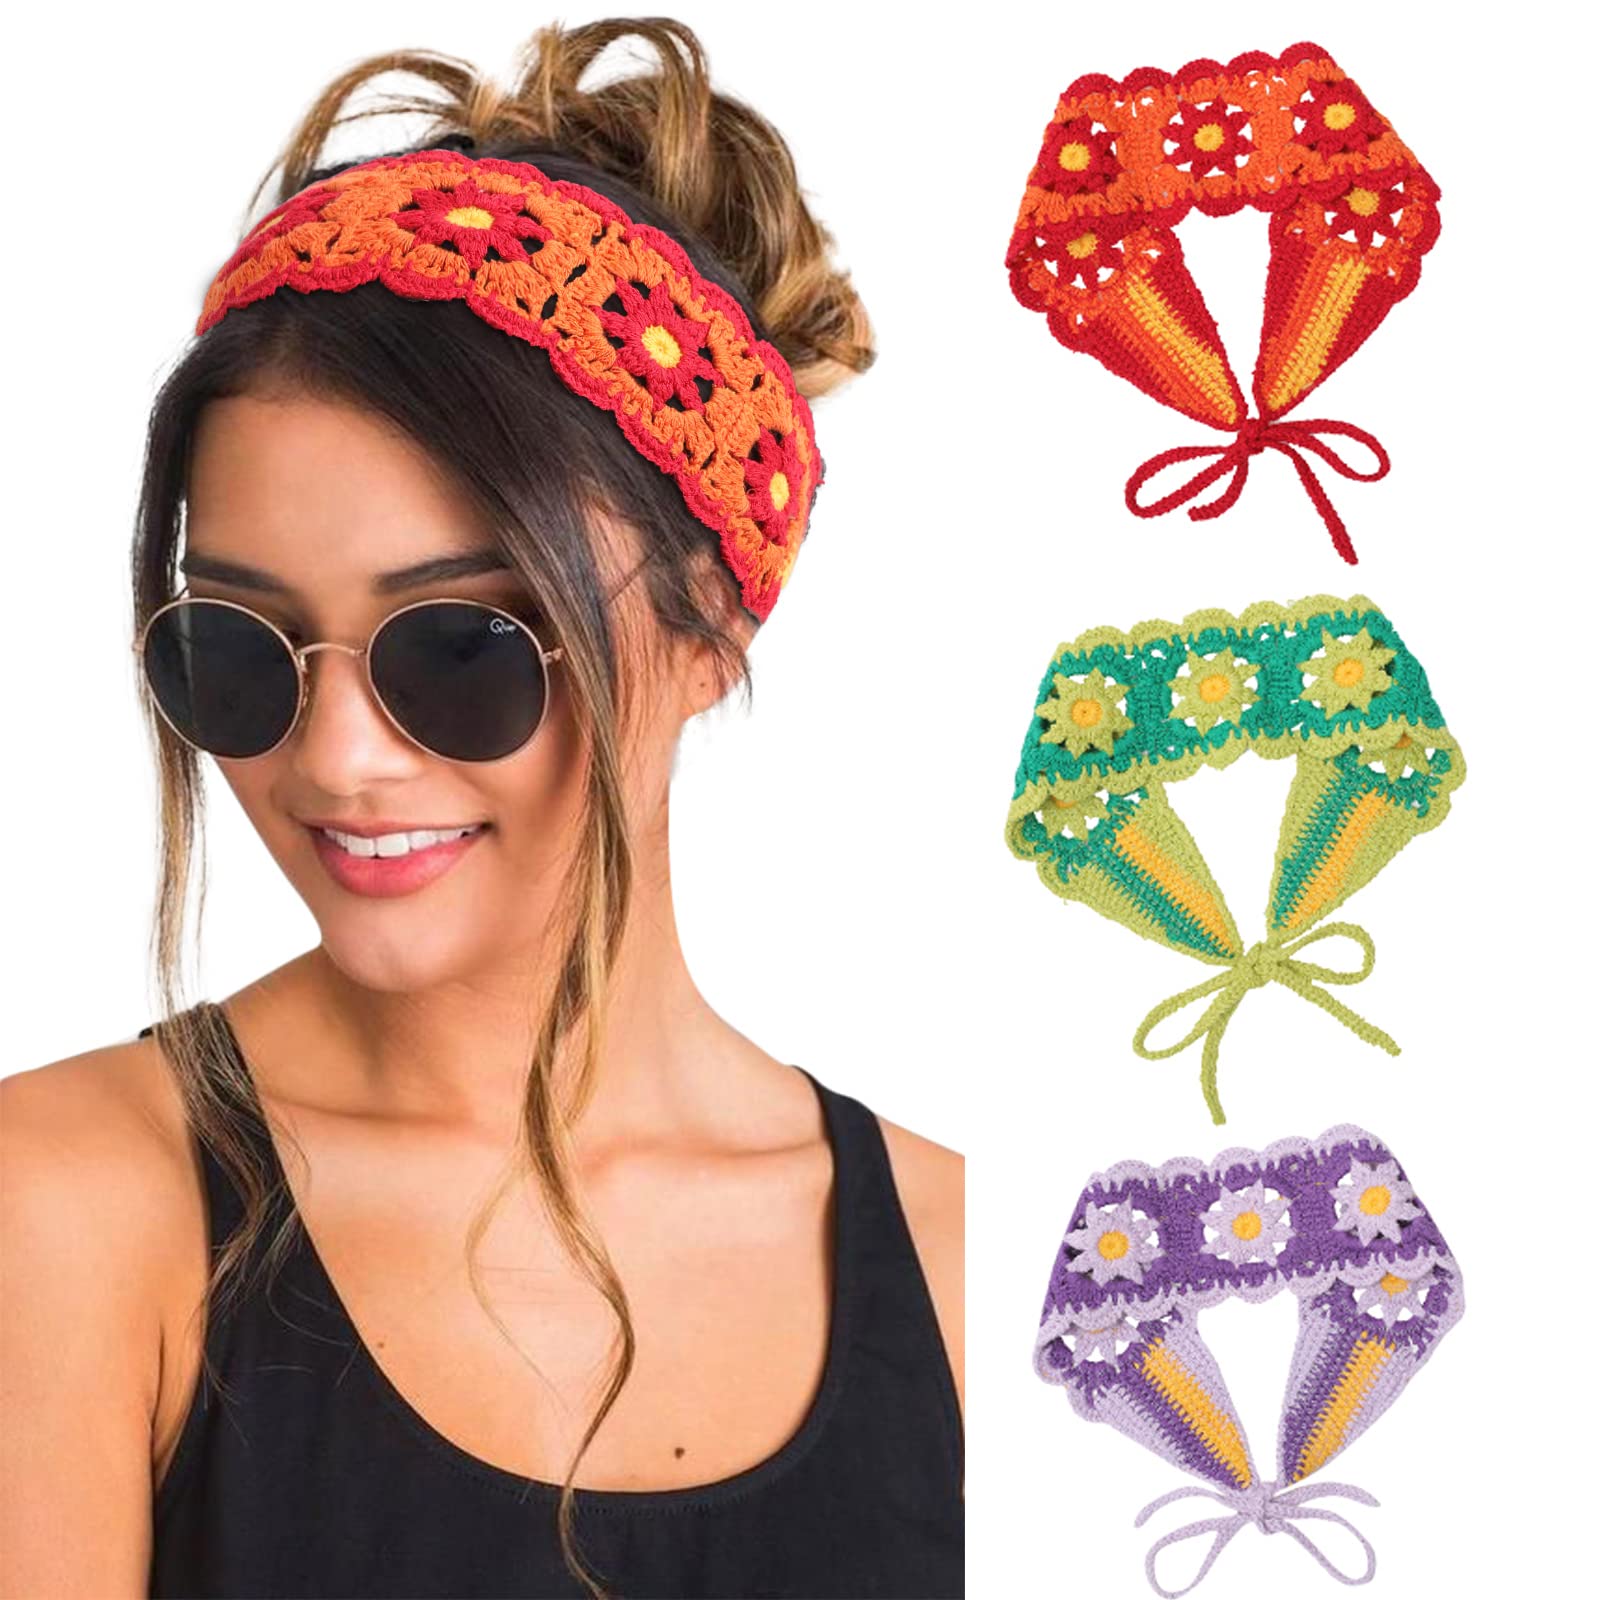 20 Gorgeous Bandana Hairstyles for Cool Girls | Hairdos for short hair, Headband  hairstyles, Scarf hairstyles